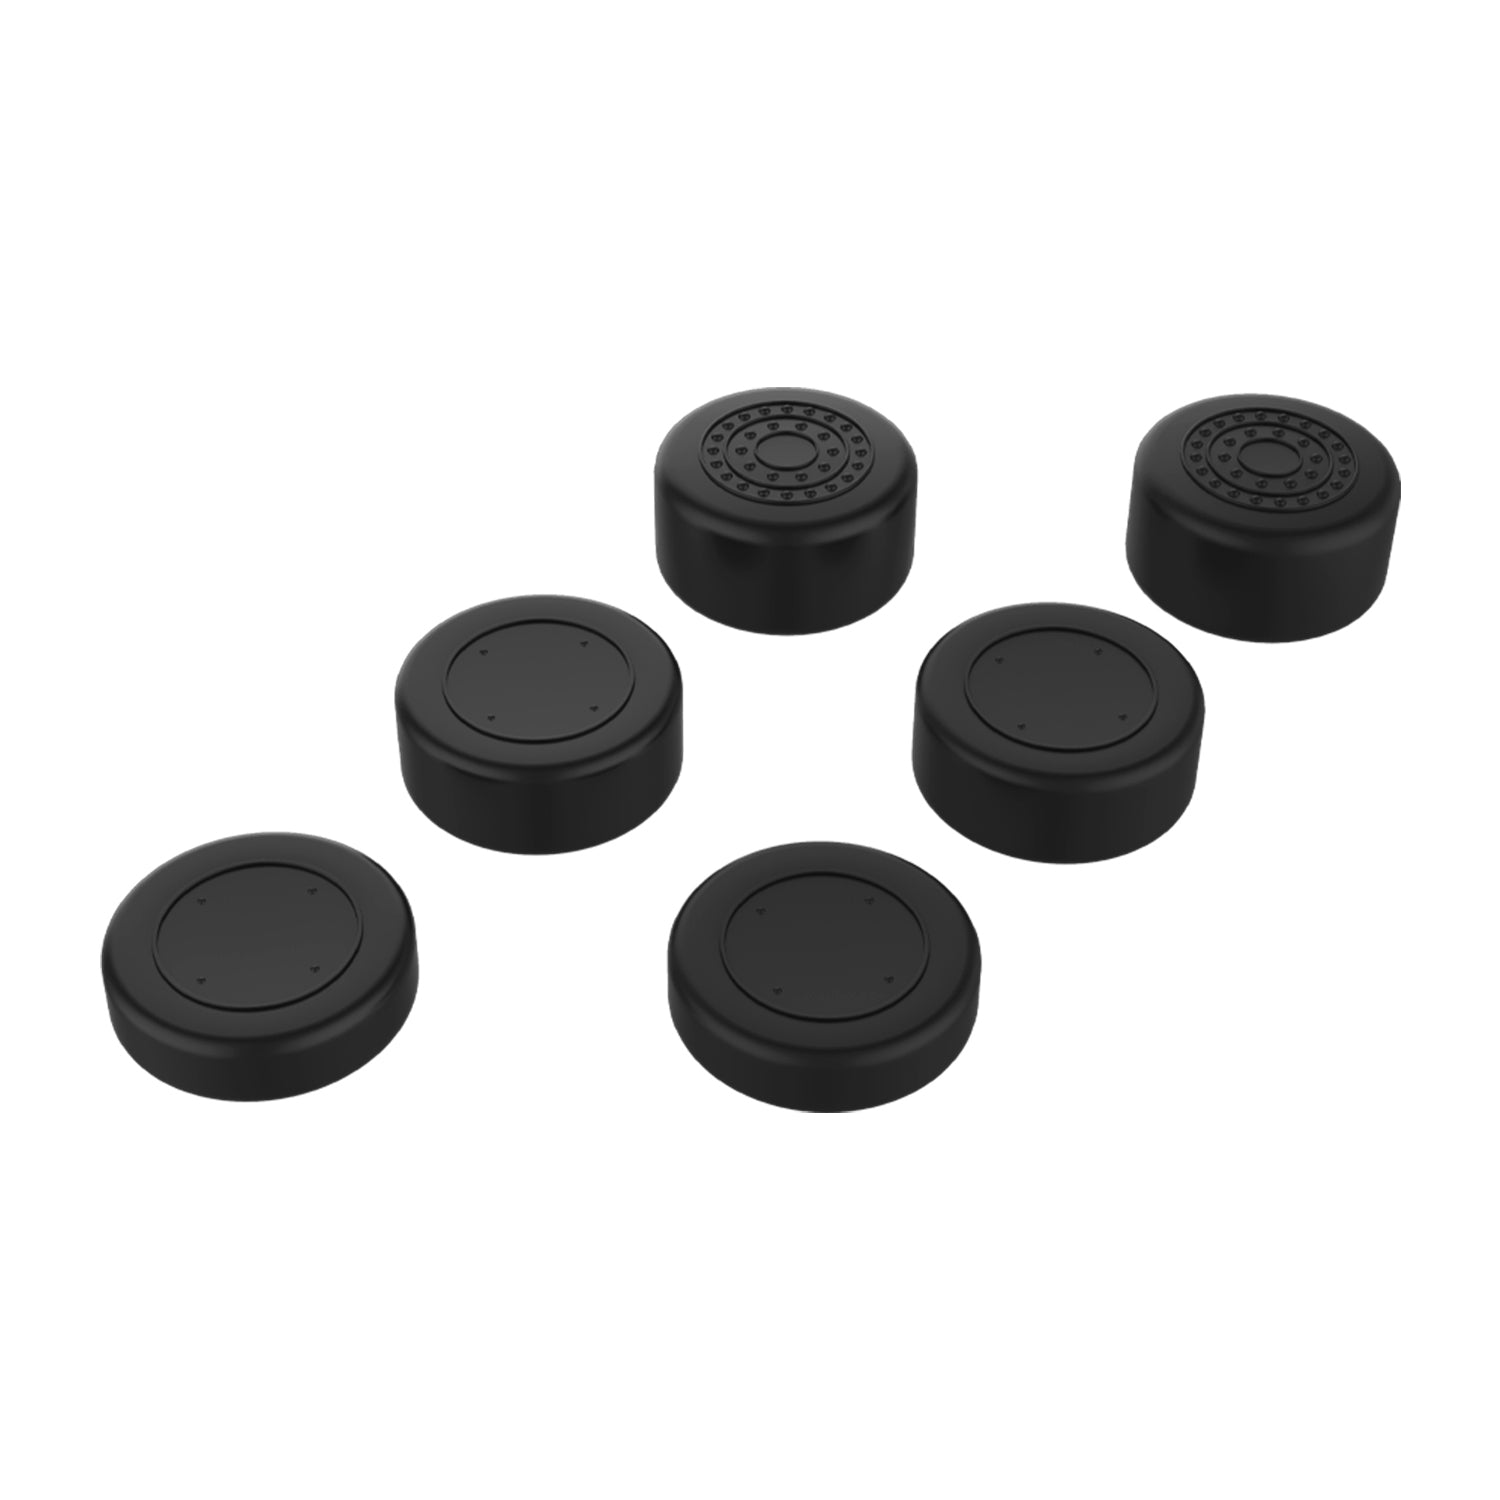 Gorilla Gaming Controller Thumb Grips for Xbox